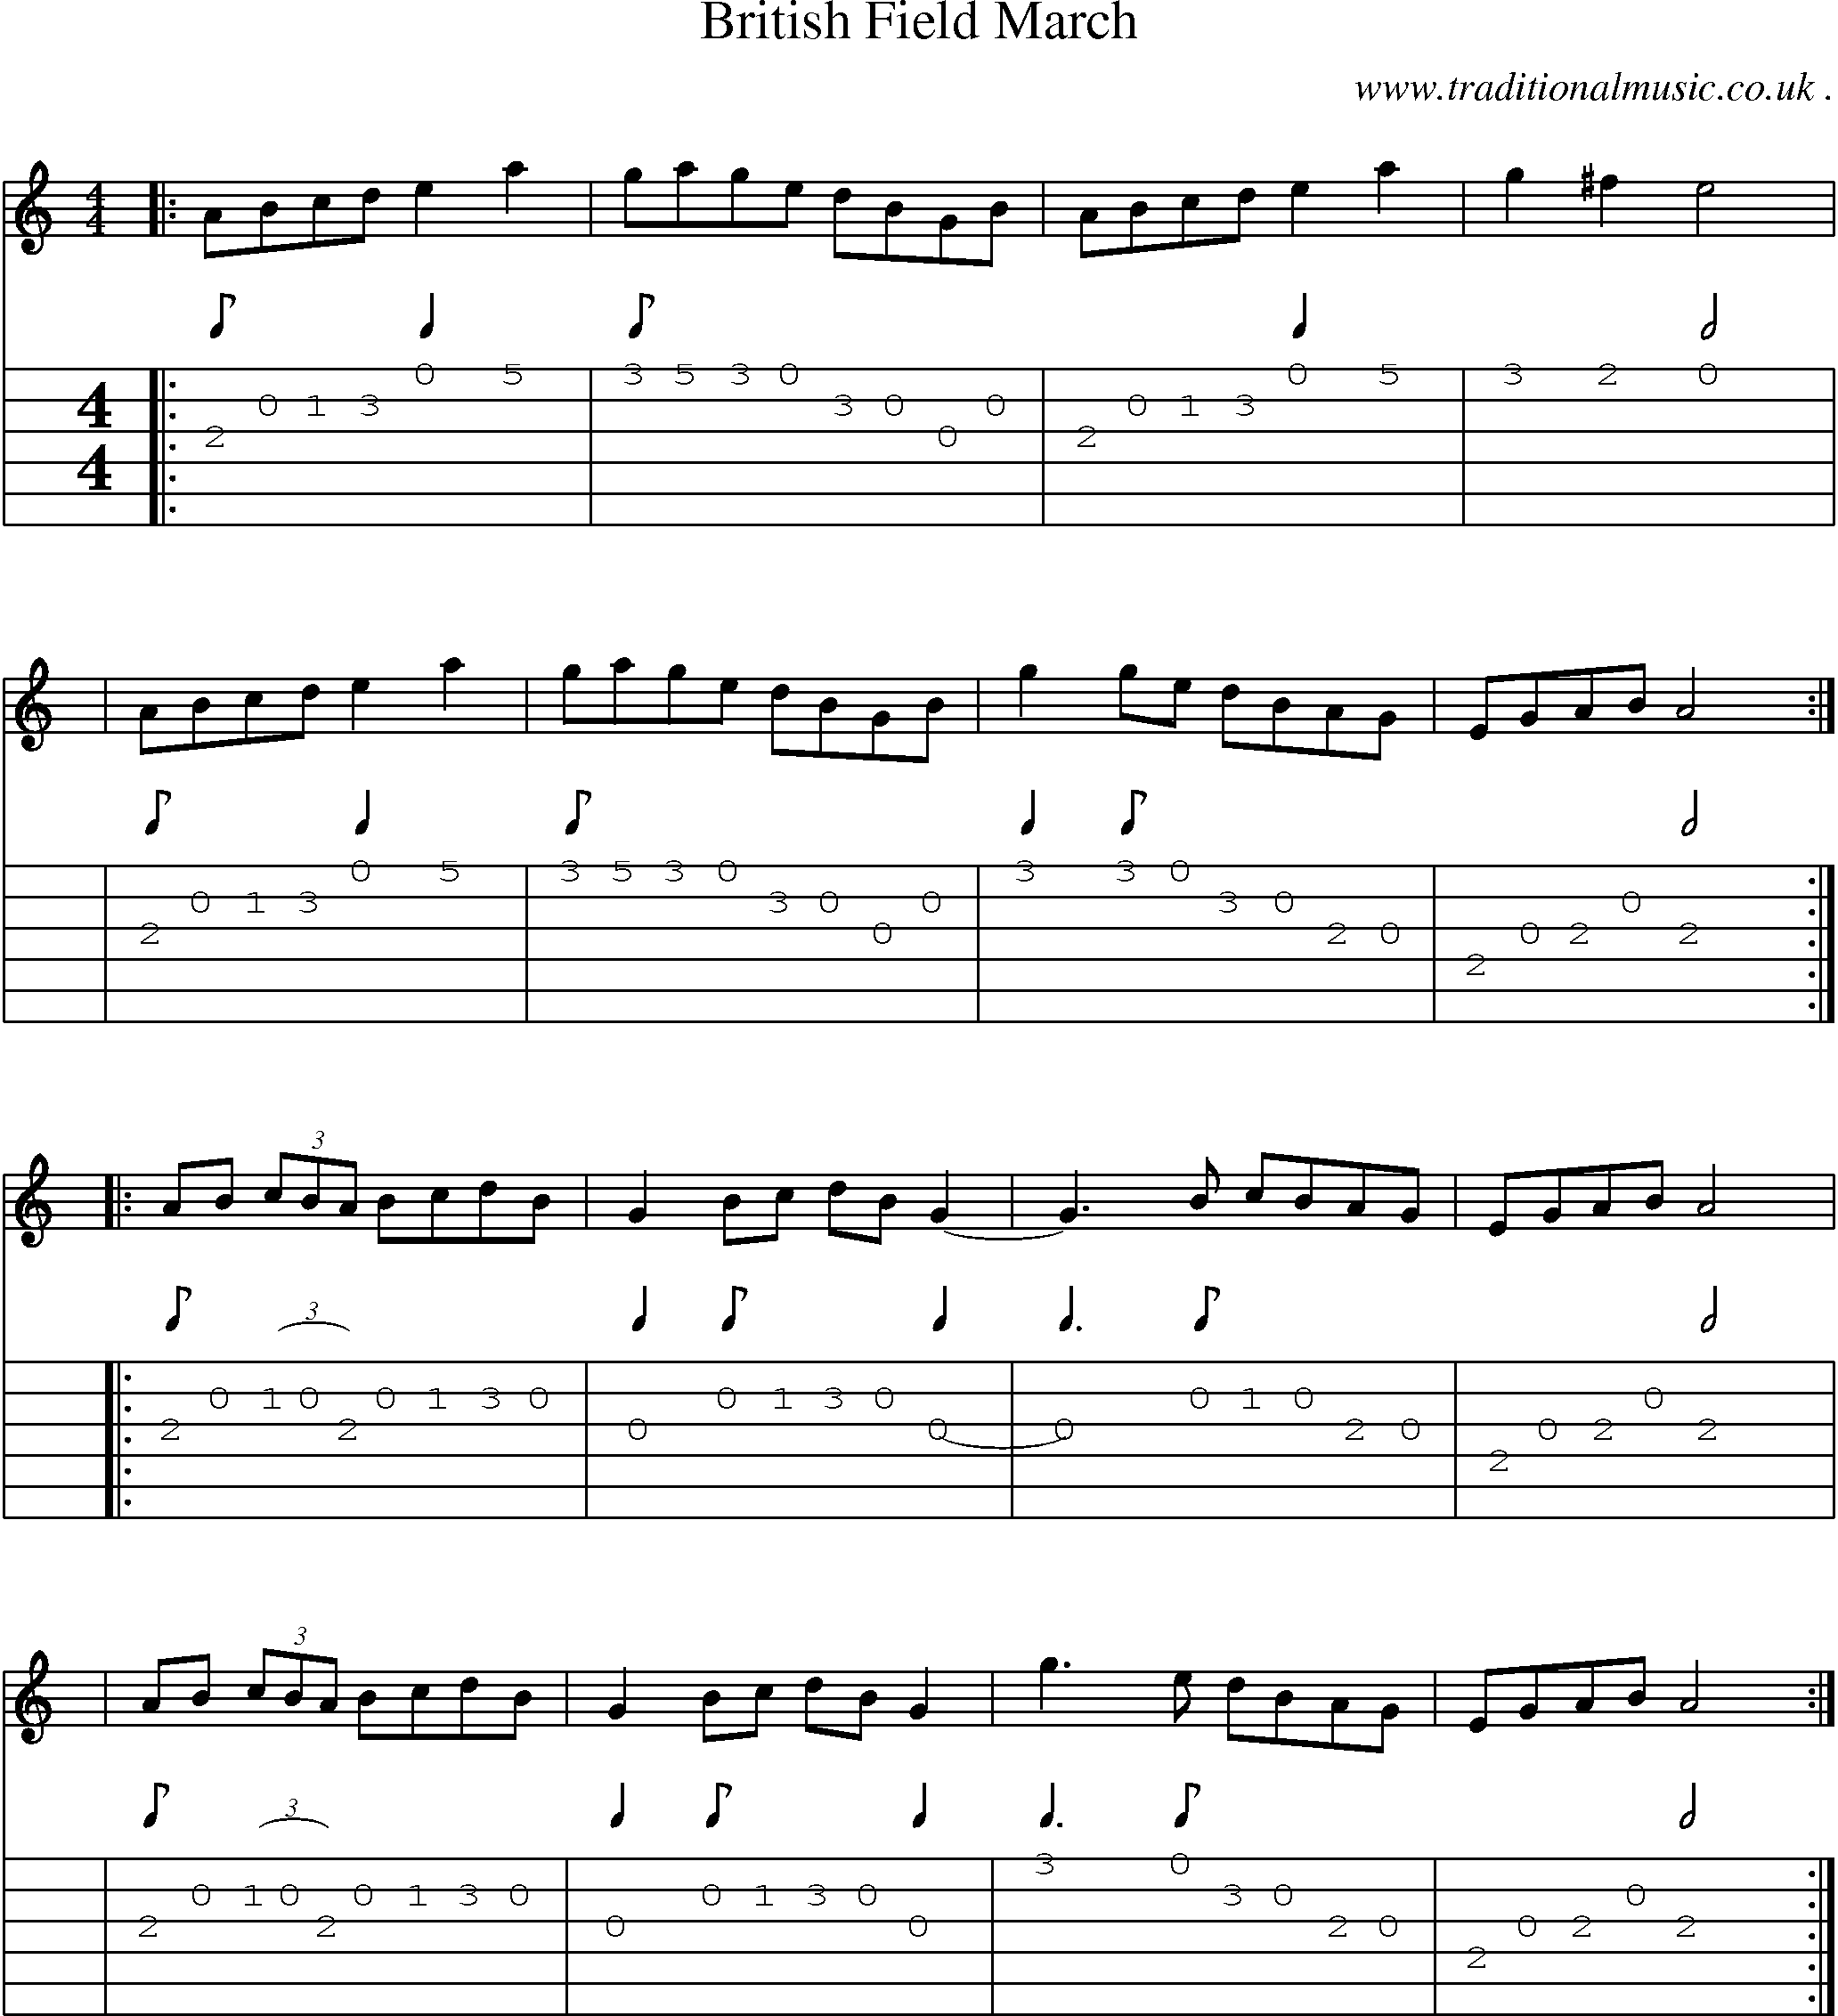 Sheet-music  score, Chords and Guitar Tabs for British Field March